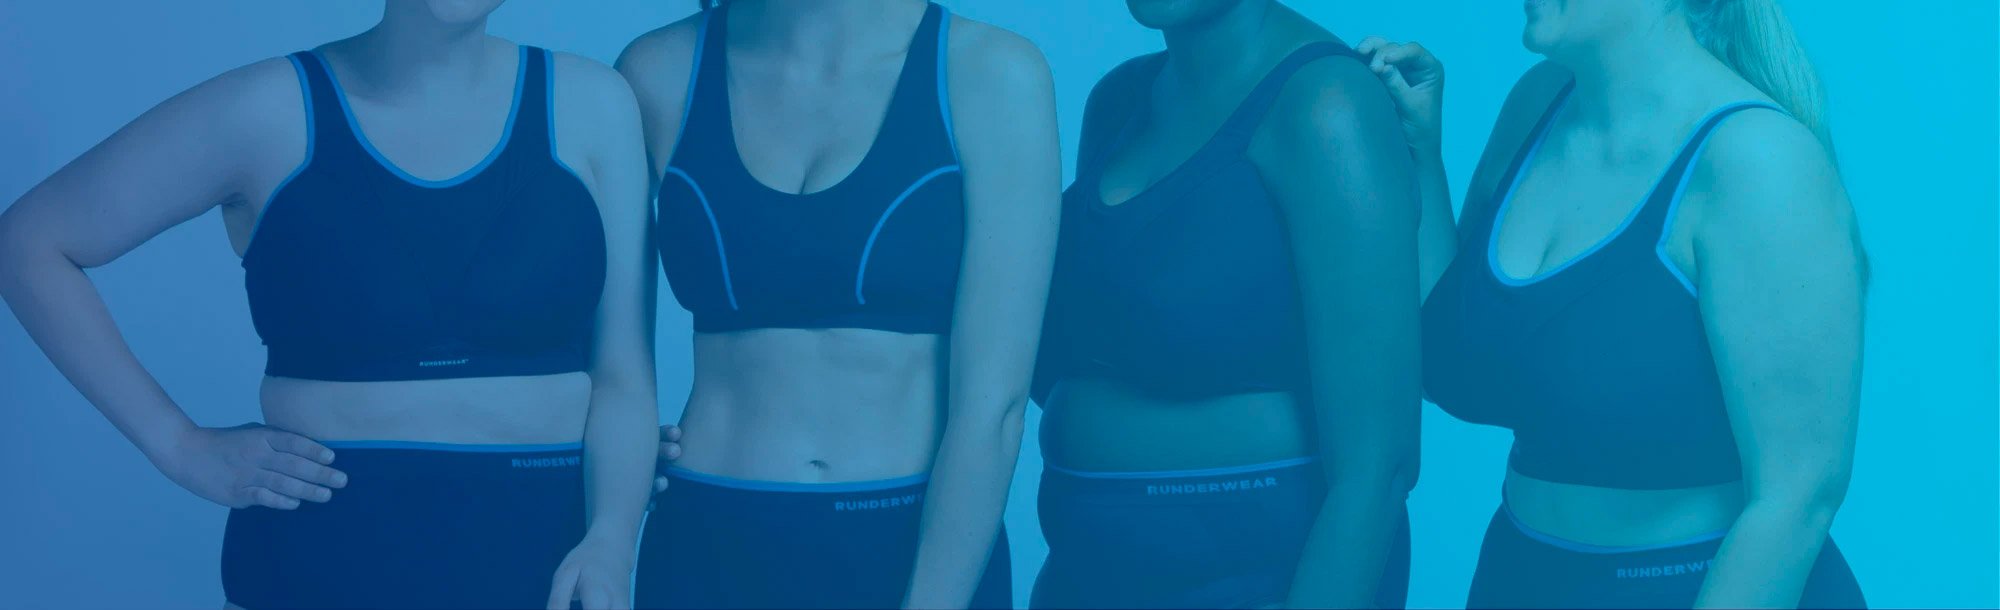 How to Double the Lifespan of Your Running Sports Bra